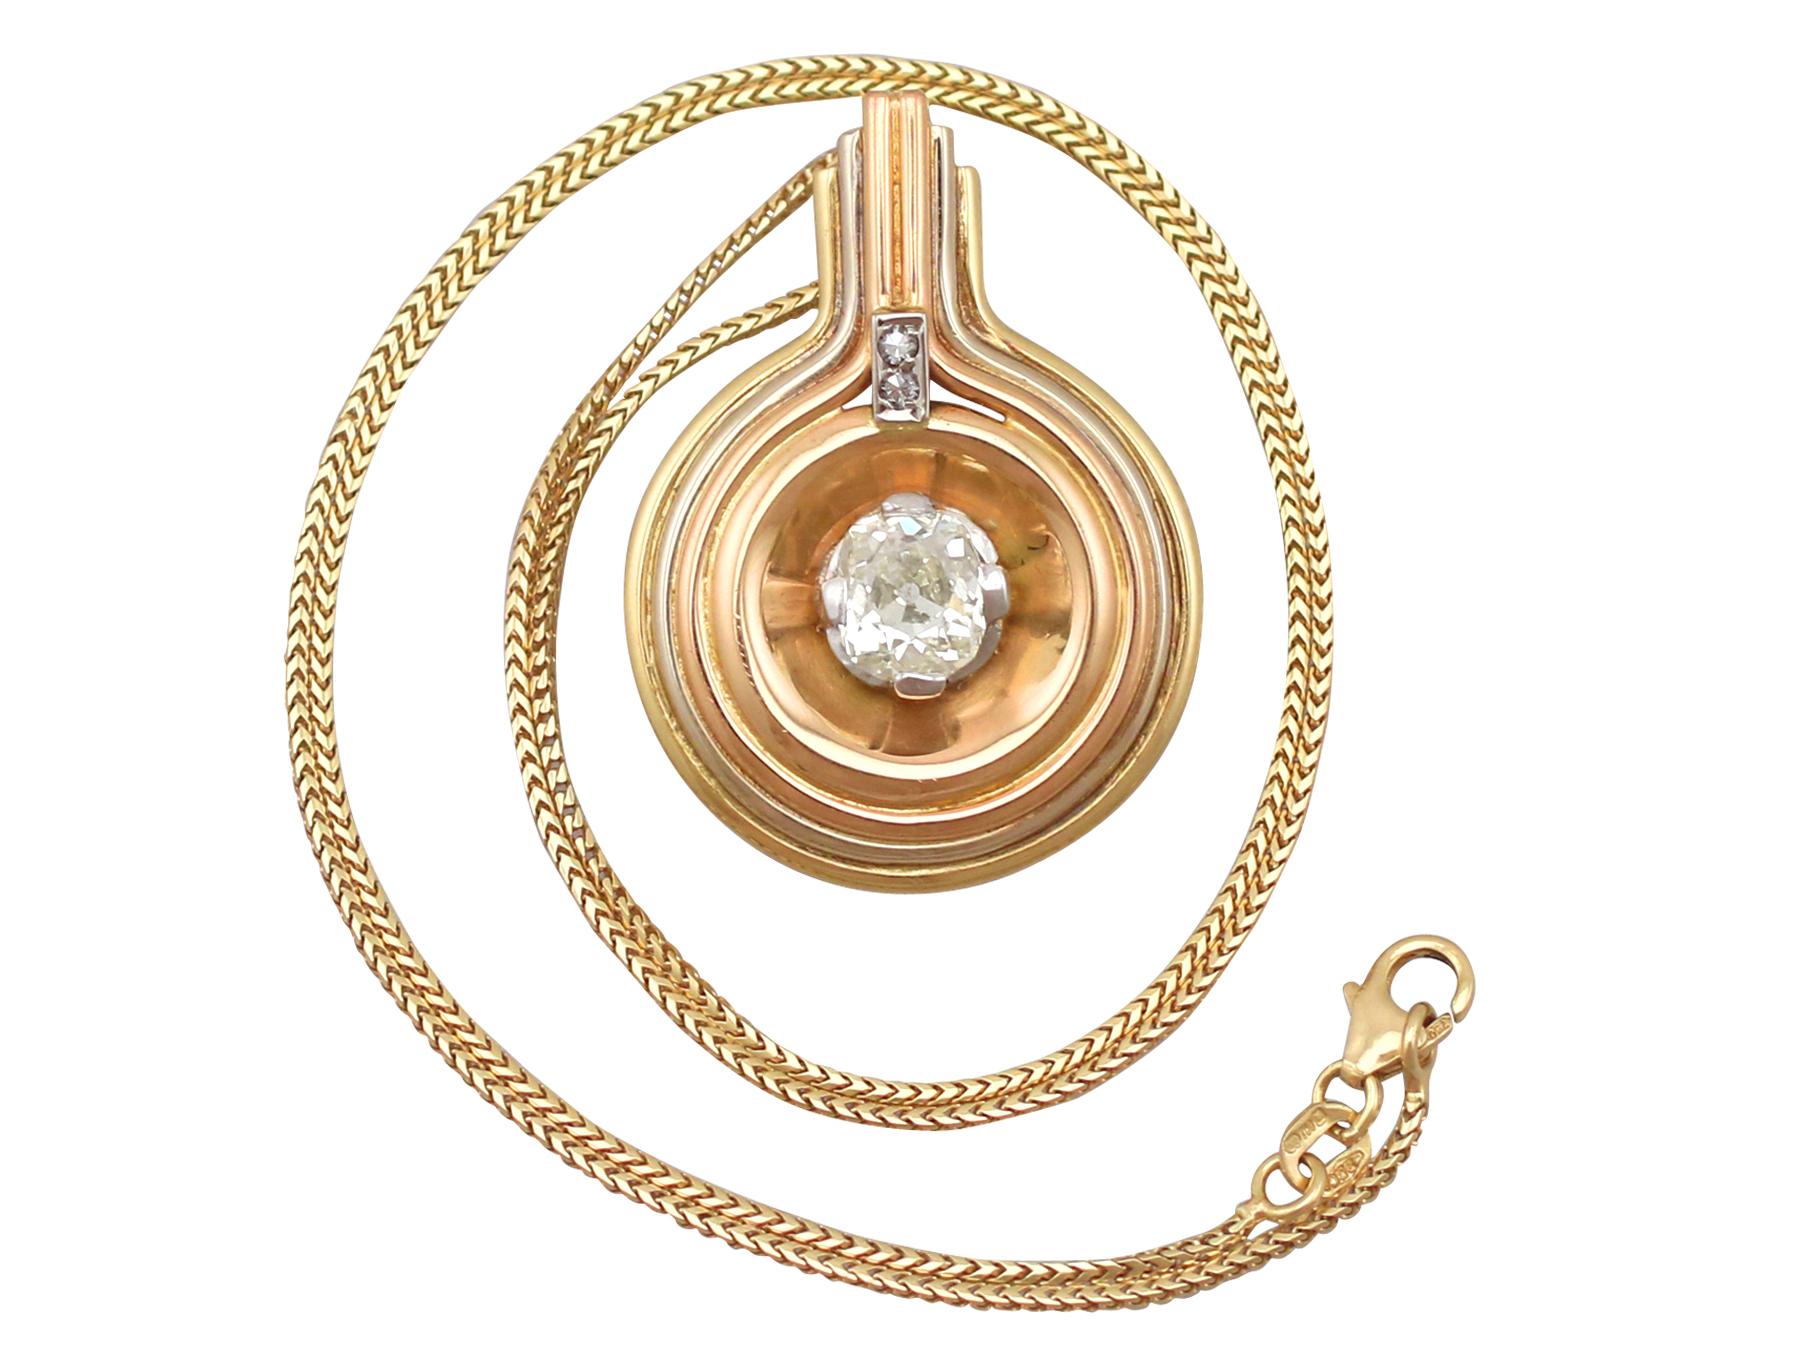 A fine and impressive antique diamond and 18 karat tri-gold pendant in the Art Deco style; part of our diverse antique and vintage jewelry/estate jewelry collections

This impressive Art Deco pendant has been crafted in tri-colour 18k gold.

This